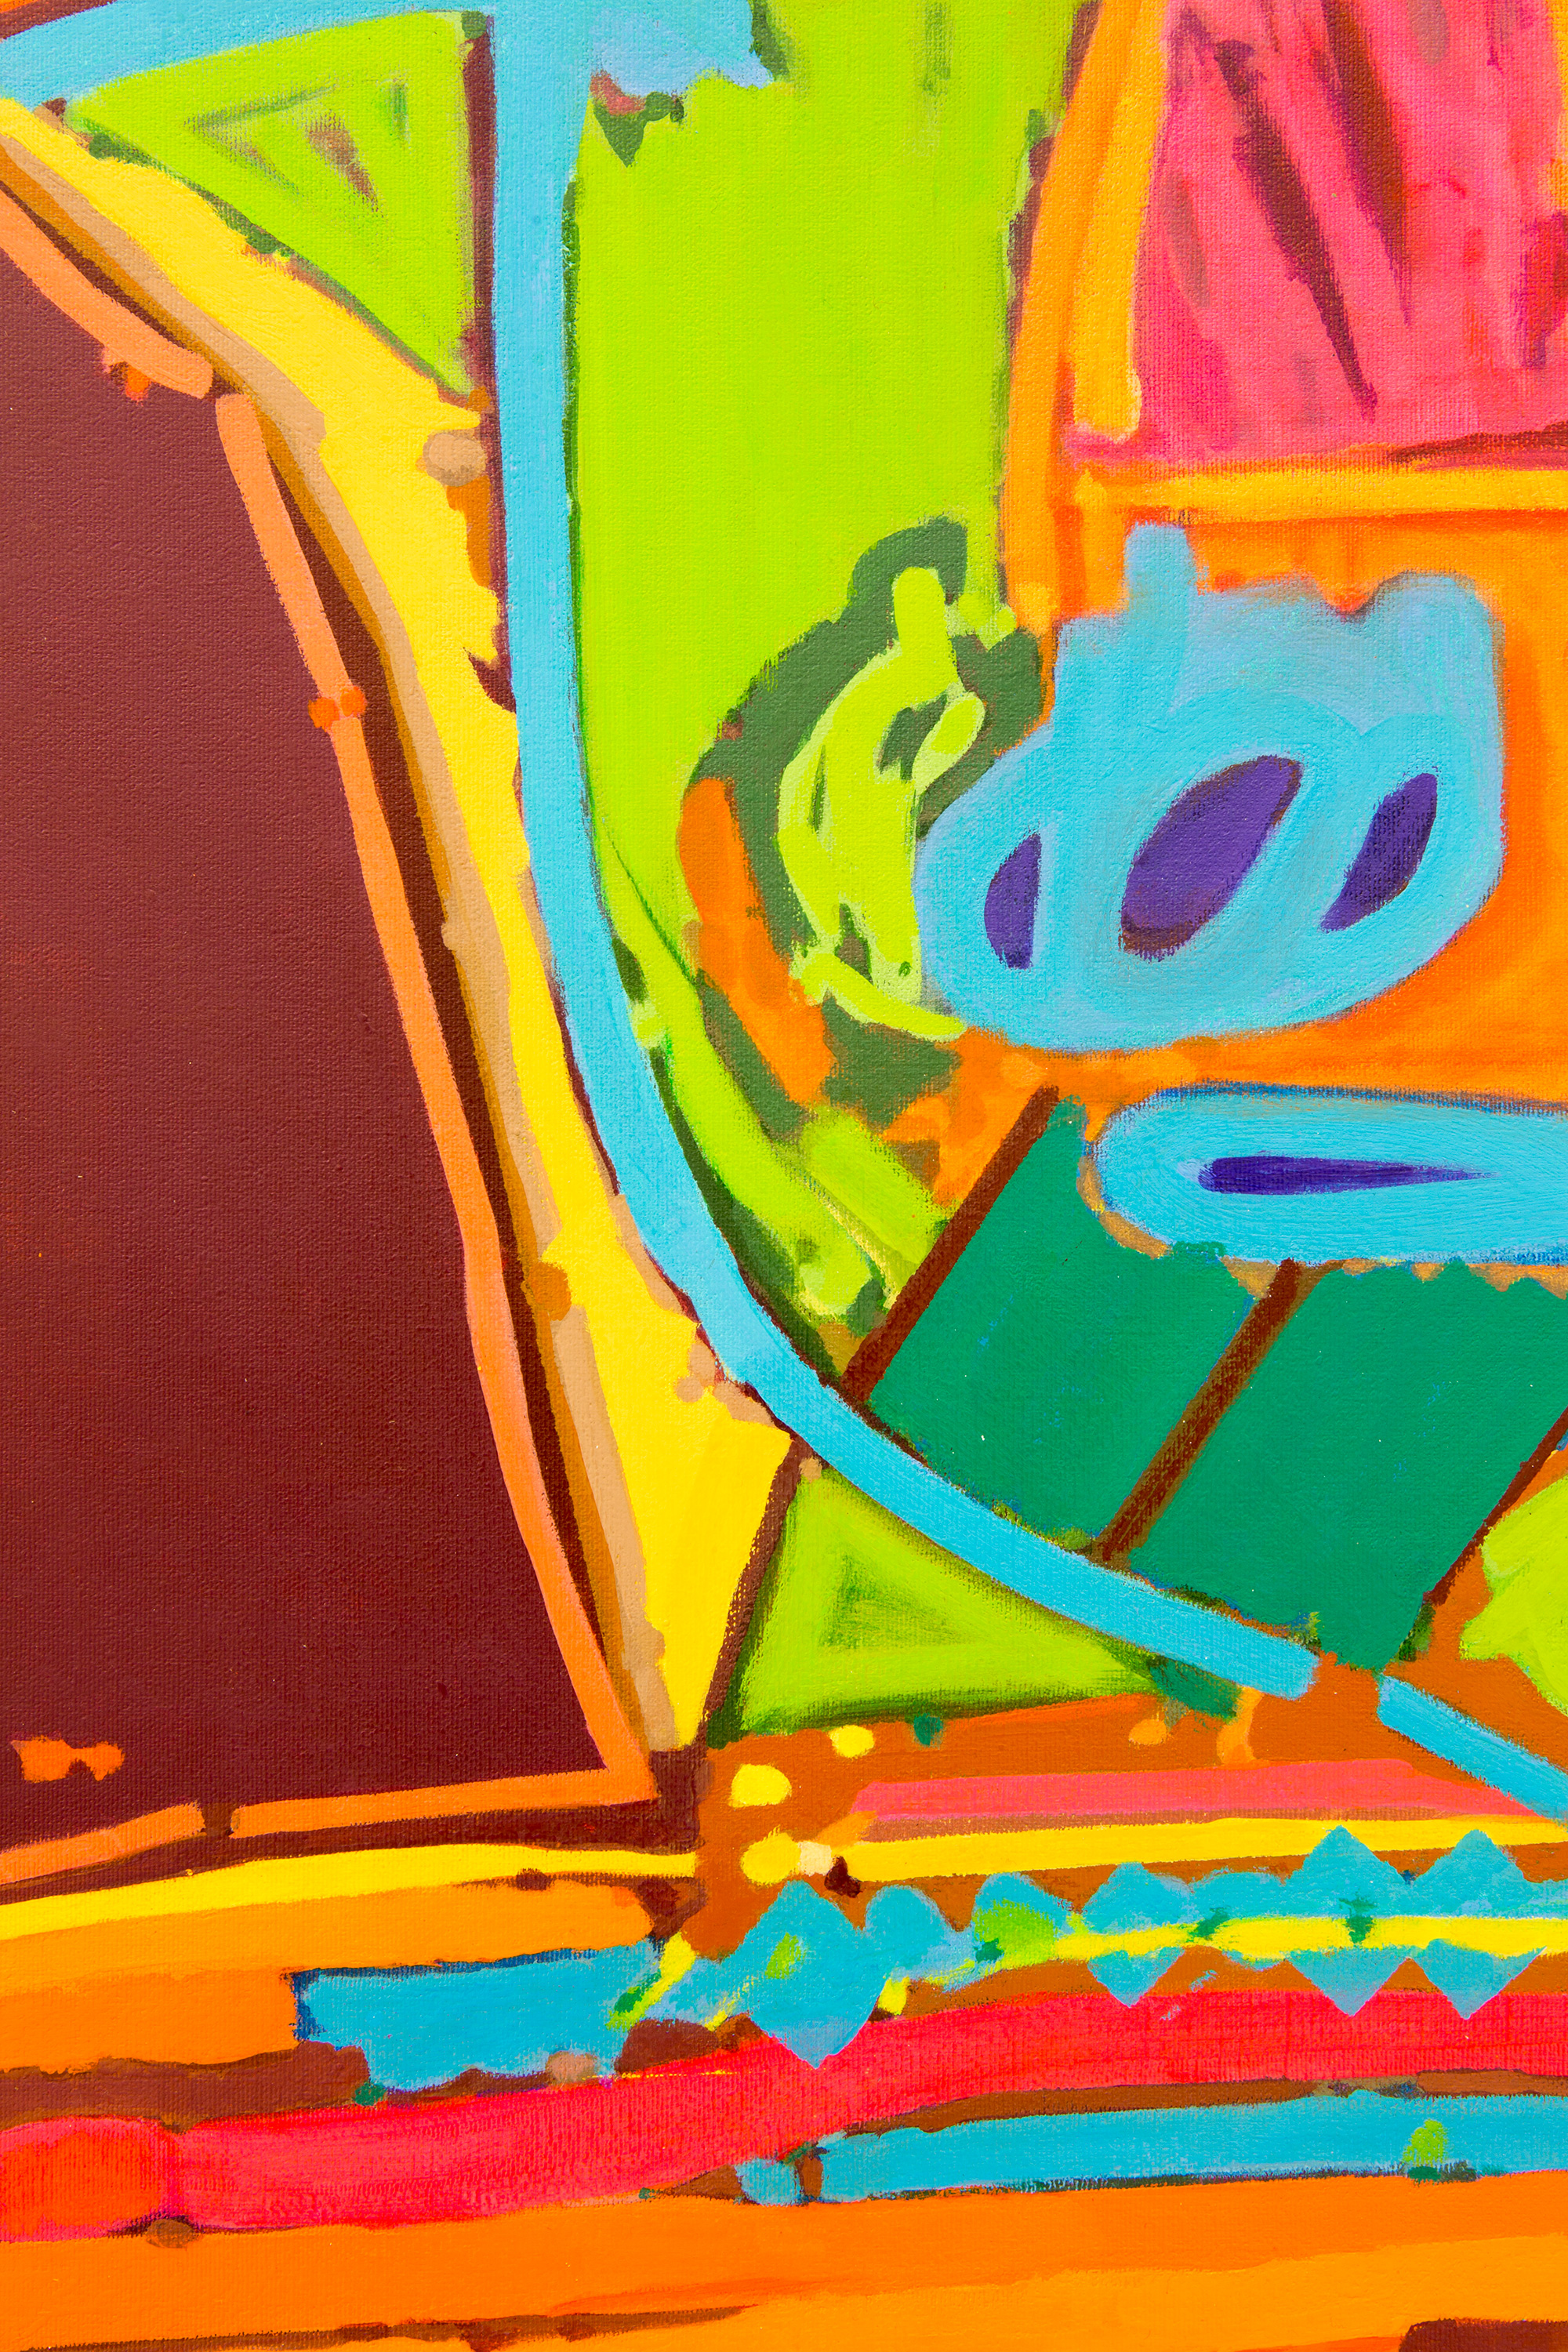 Diena Georgetti, “KNIGHT the LIGHTNING” (detail), 2015, acrylic on canvas, frame, 63.5 × 84 cm